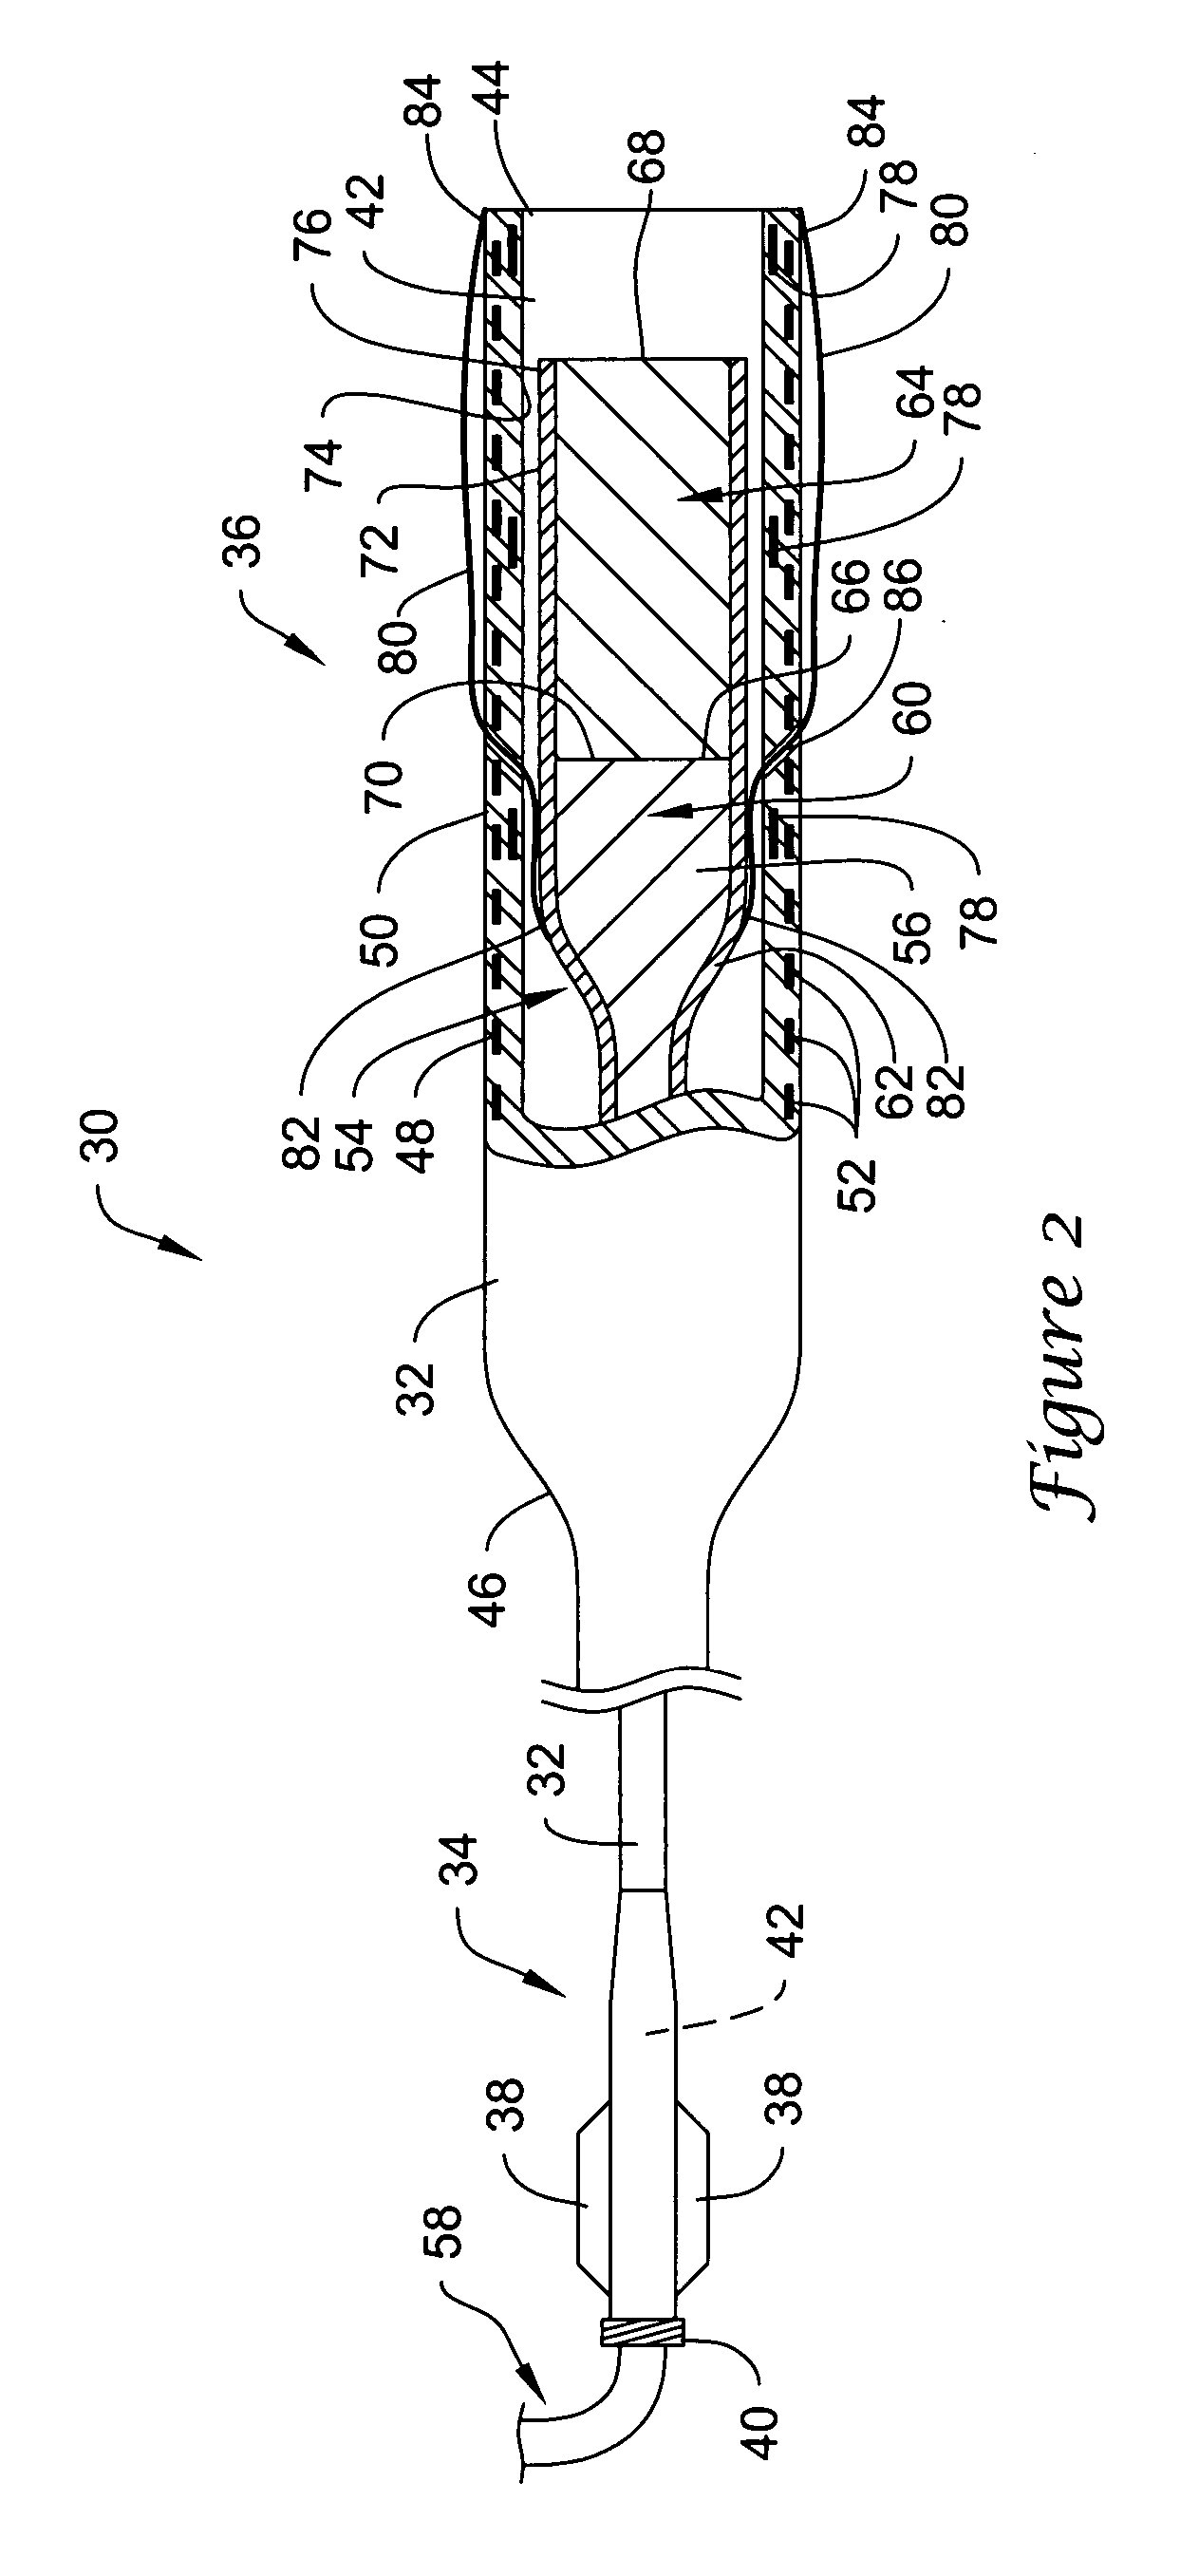 Devices and methods for magnetically manipulating intravascular devices